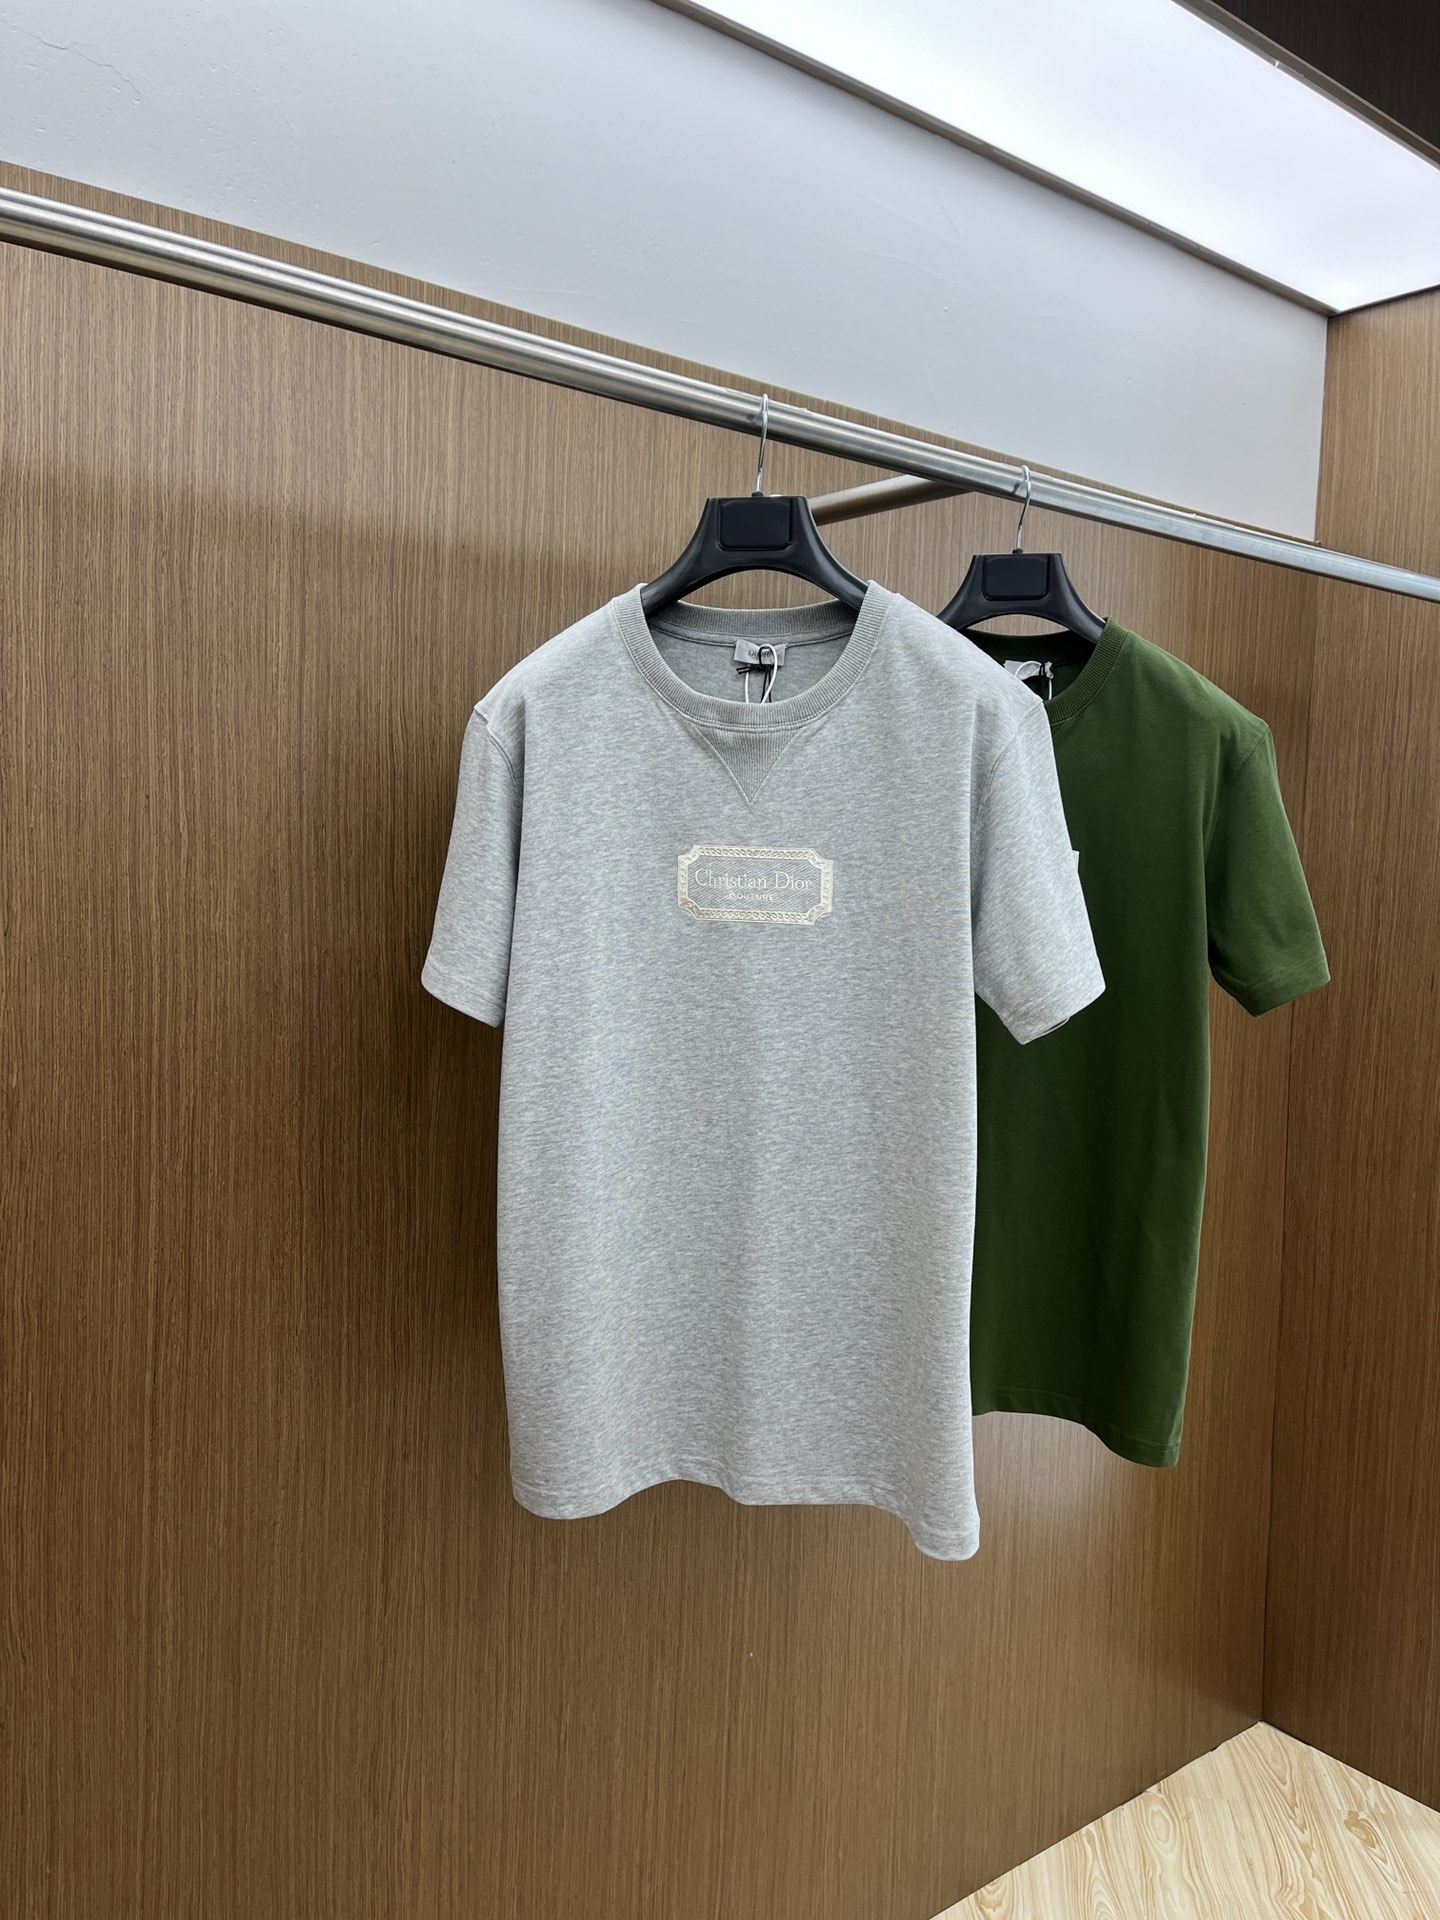 Dior Clothing T-Shirt Beige Black Blue Green Grey White Embroidery Unisex Cotton Knitting Spring Collection Short Sleeve